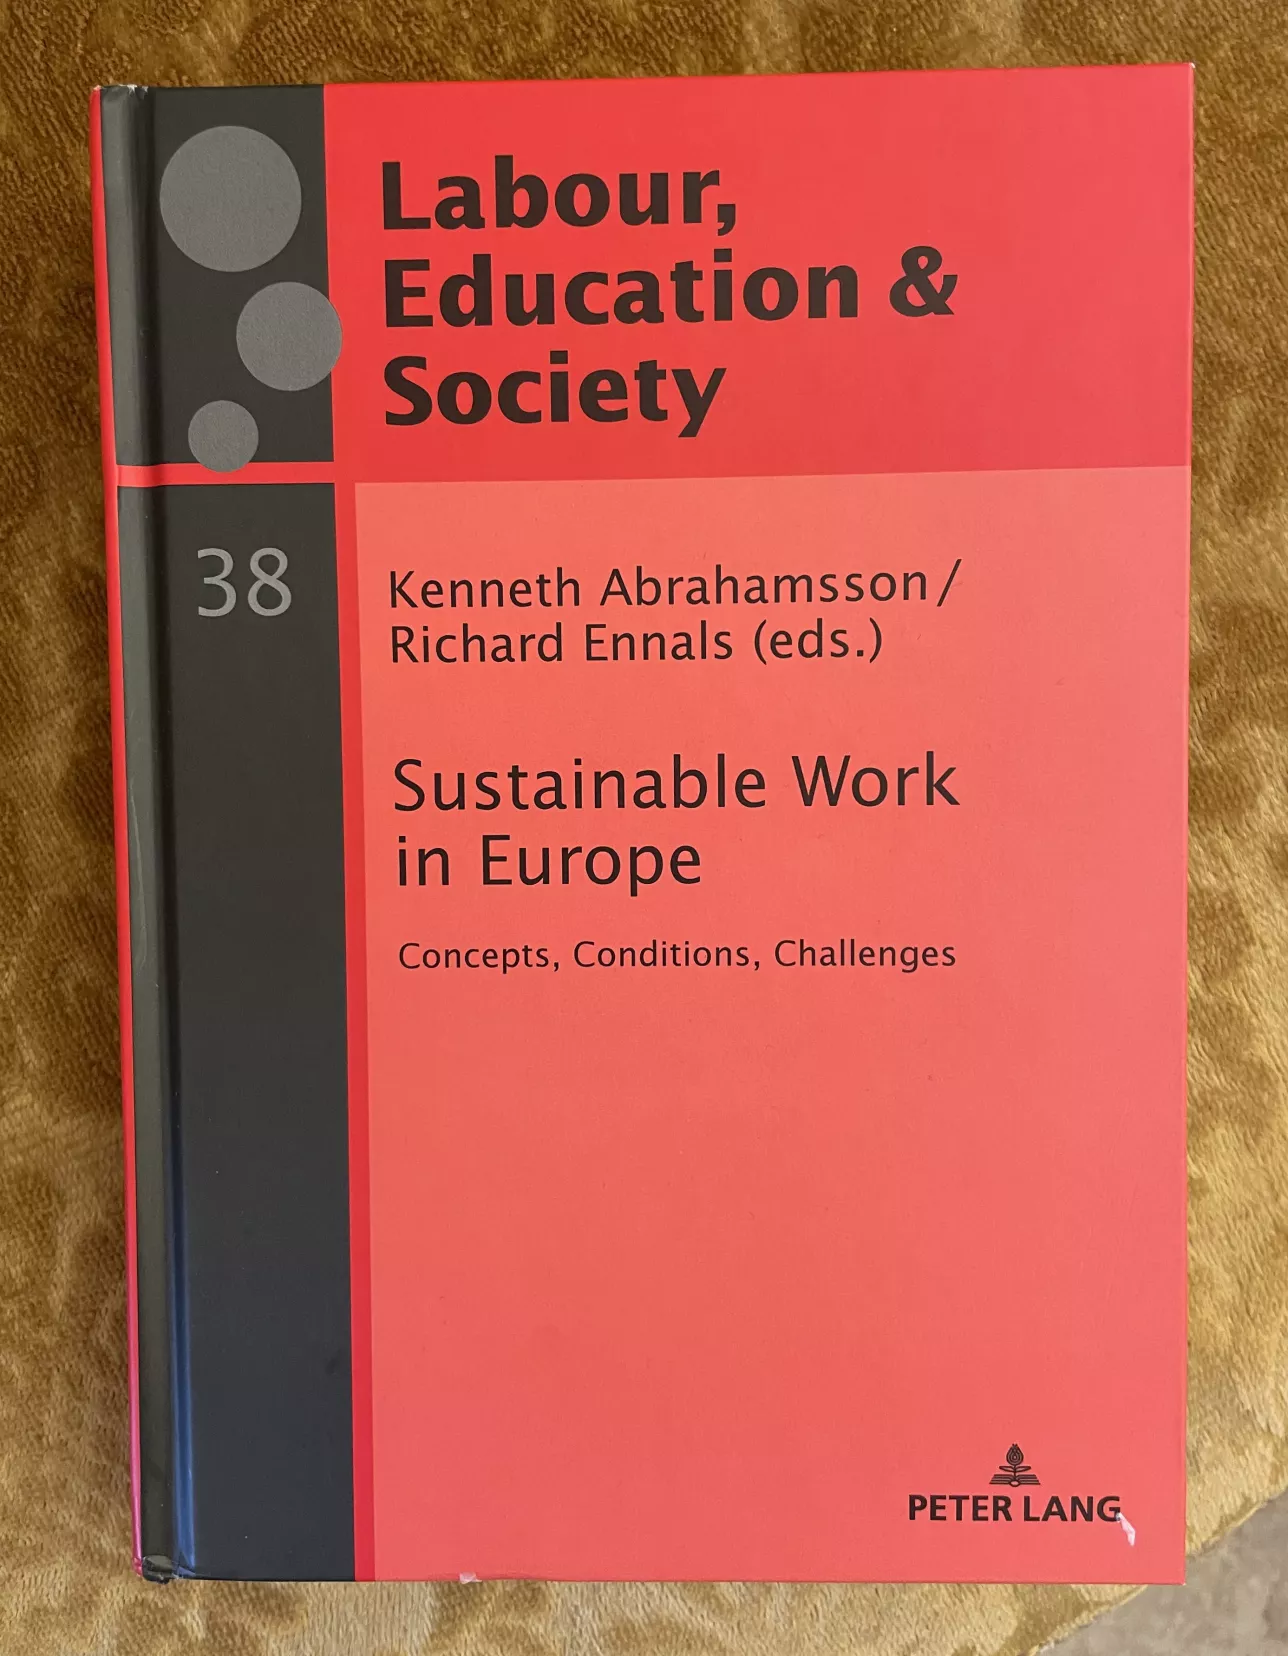 Book cover Labour, education and society. Photo: Emma Lord.